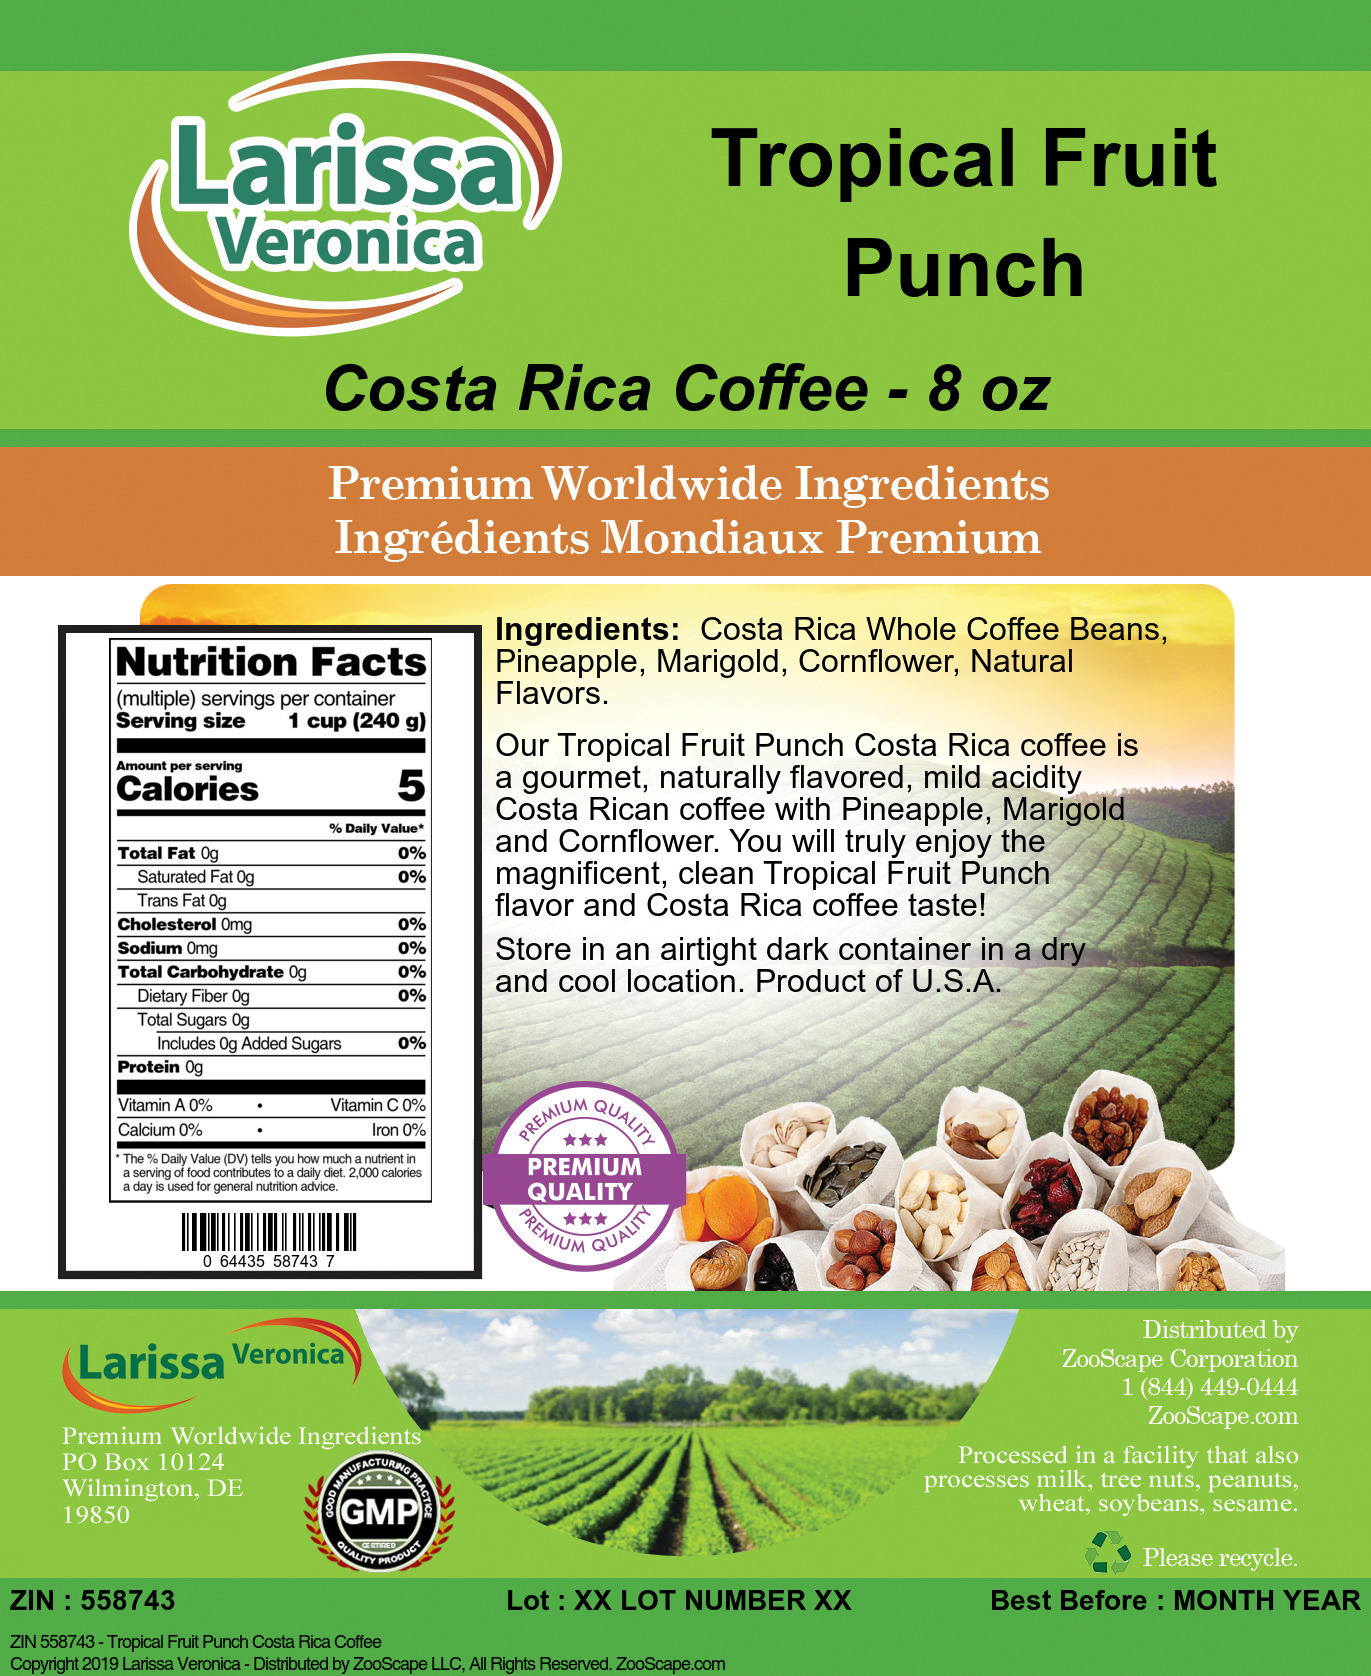 Tropical Fruit Punch Costa Rica Coffee - Label